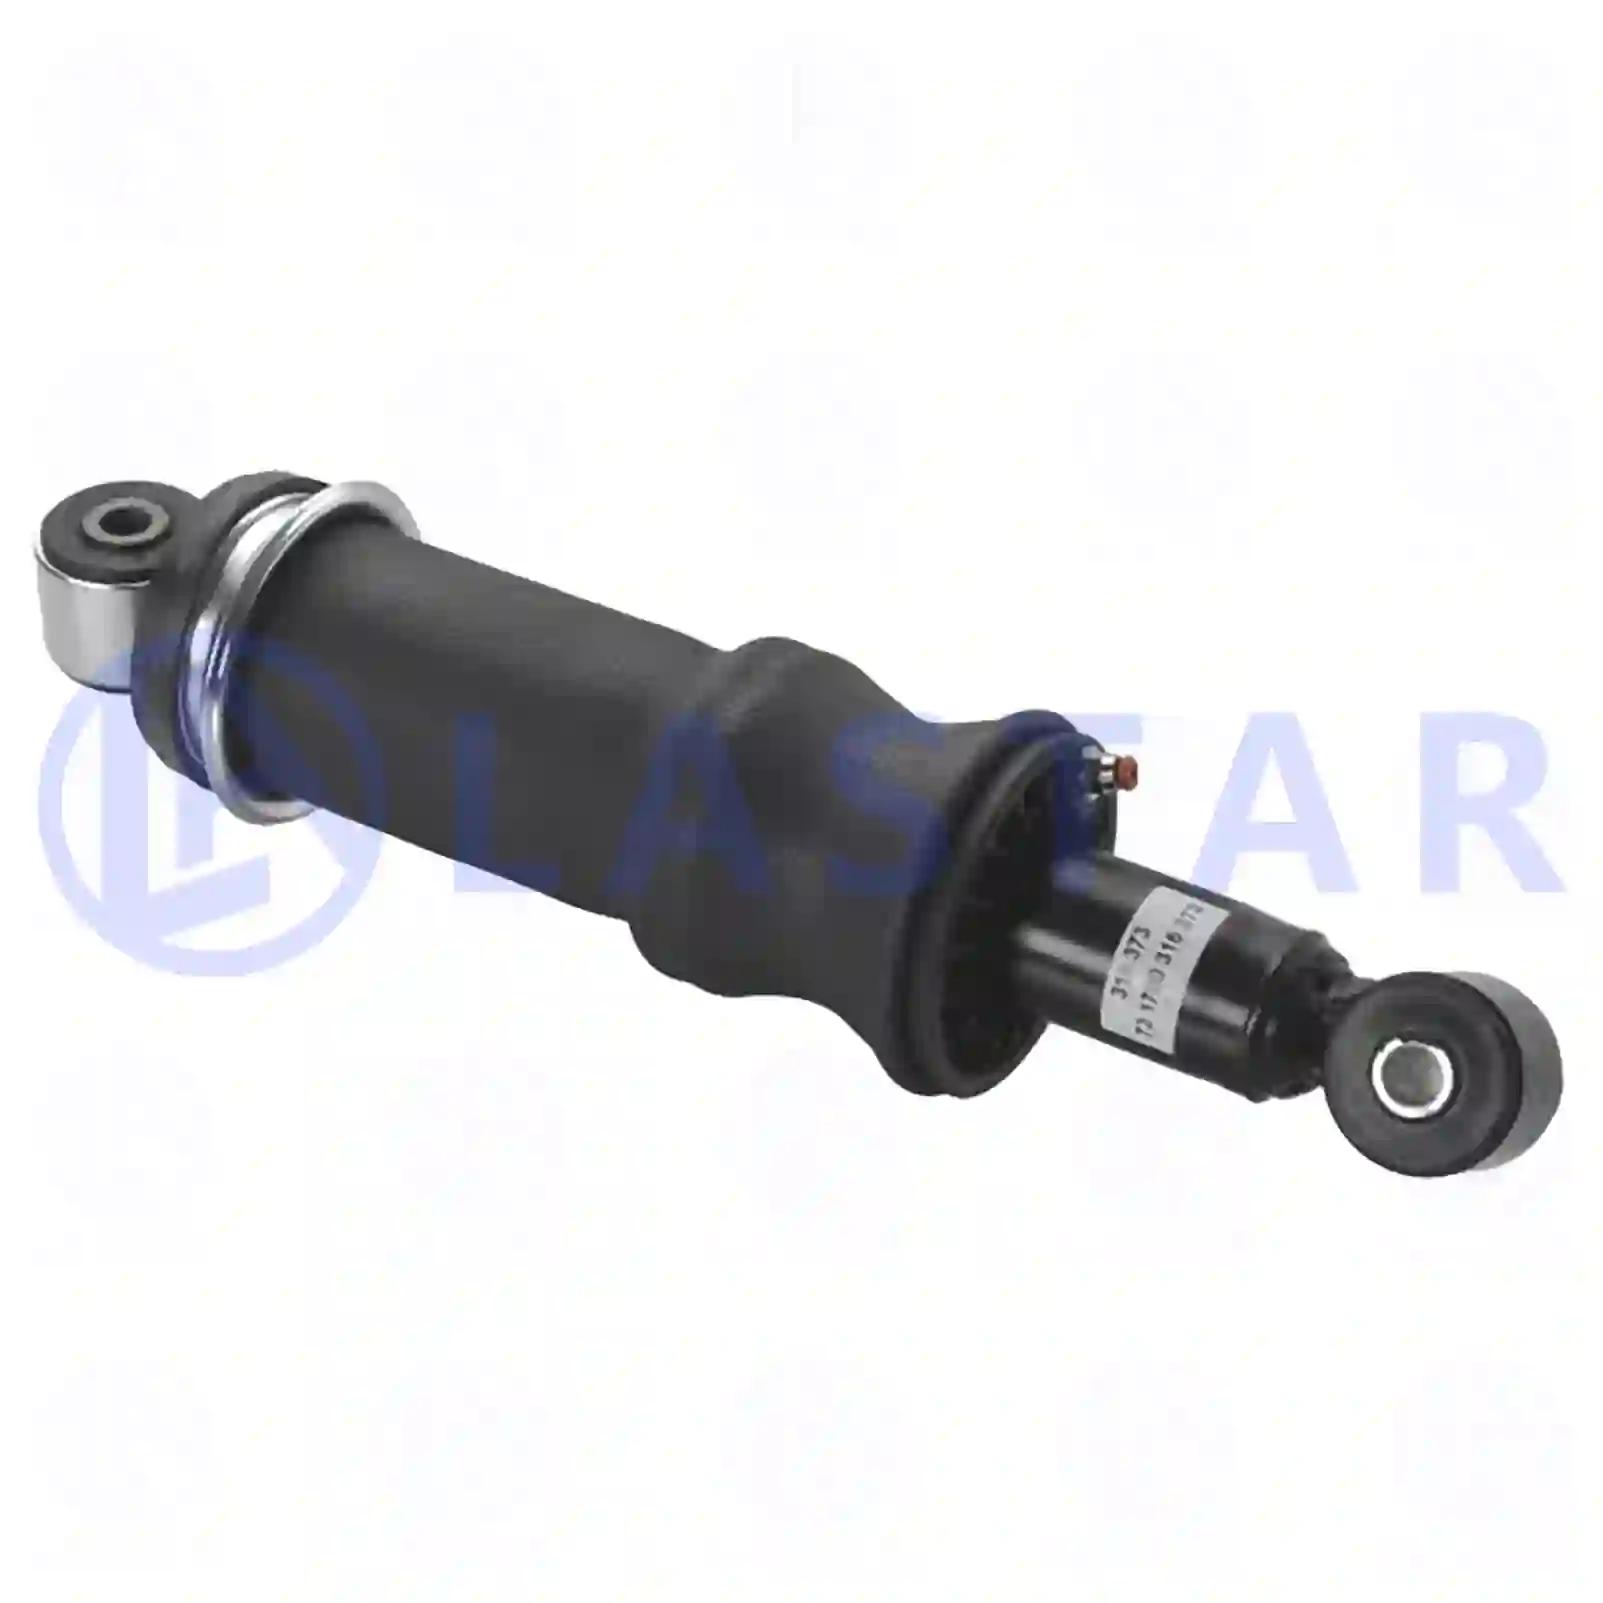 Shock Absorber Cabin shock absorber, with air bellow, la no: 77735738 ,  oem no:1076855, 20427879, 20427897, 20721169, 20775212, 20889134, 21651231, 22144200, 3172985, ZG41215-0008 Lastar Spare Part | Truck Spare Parts, Auotomotive Spare Parts